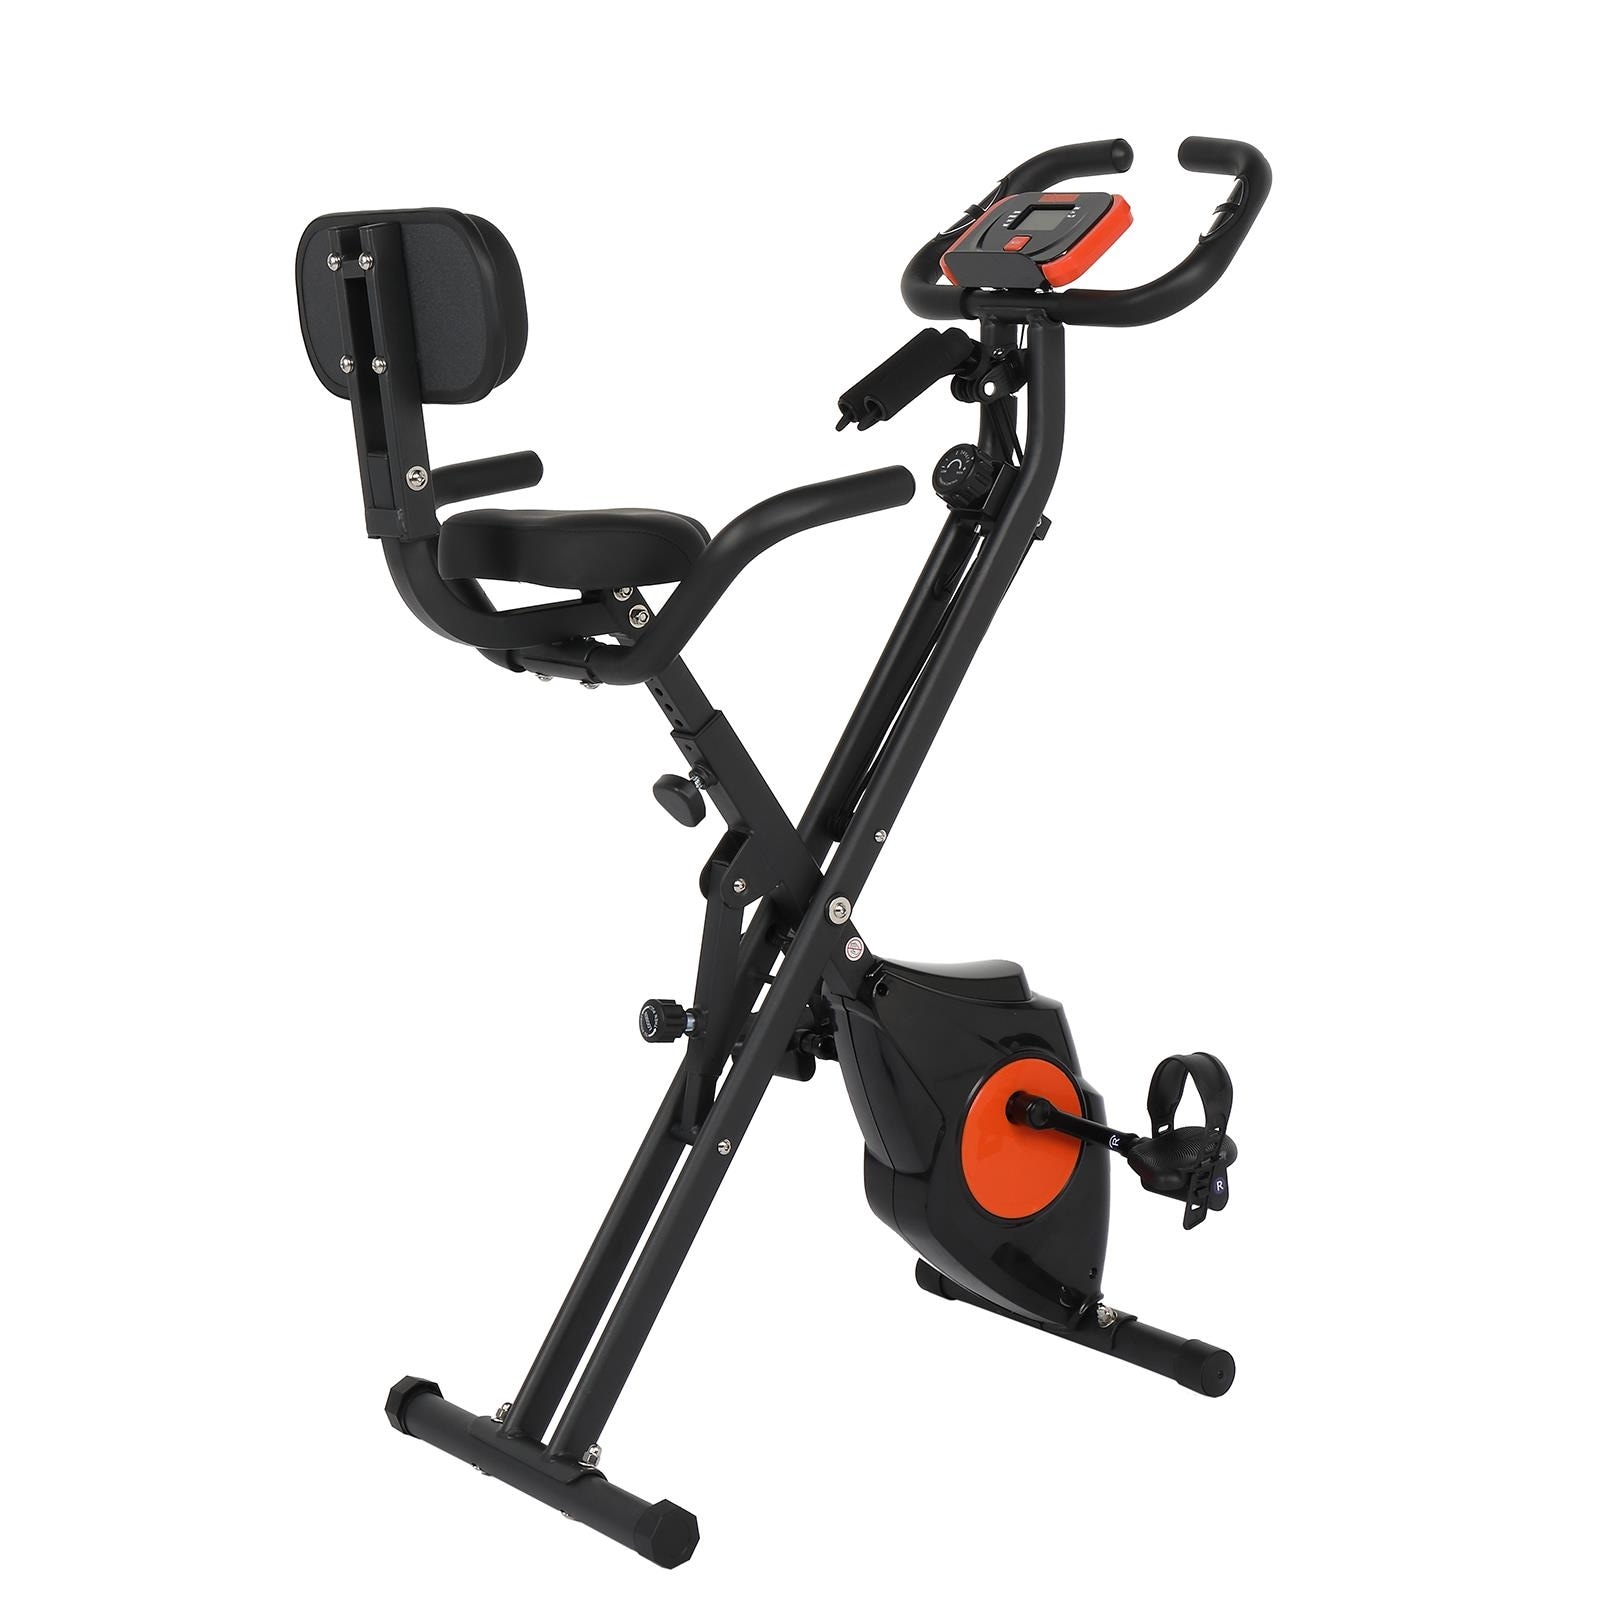 Folding Exercise Bike, Indoor Cycling Bike for Home Gym Use